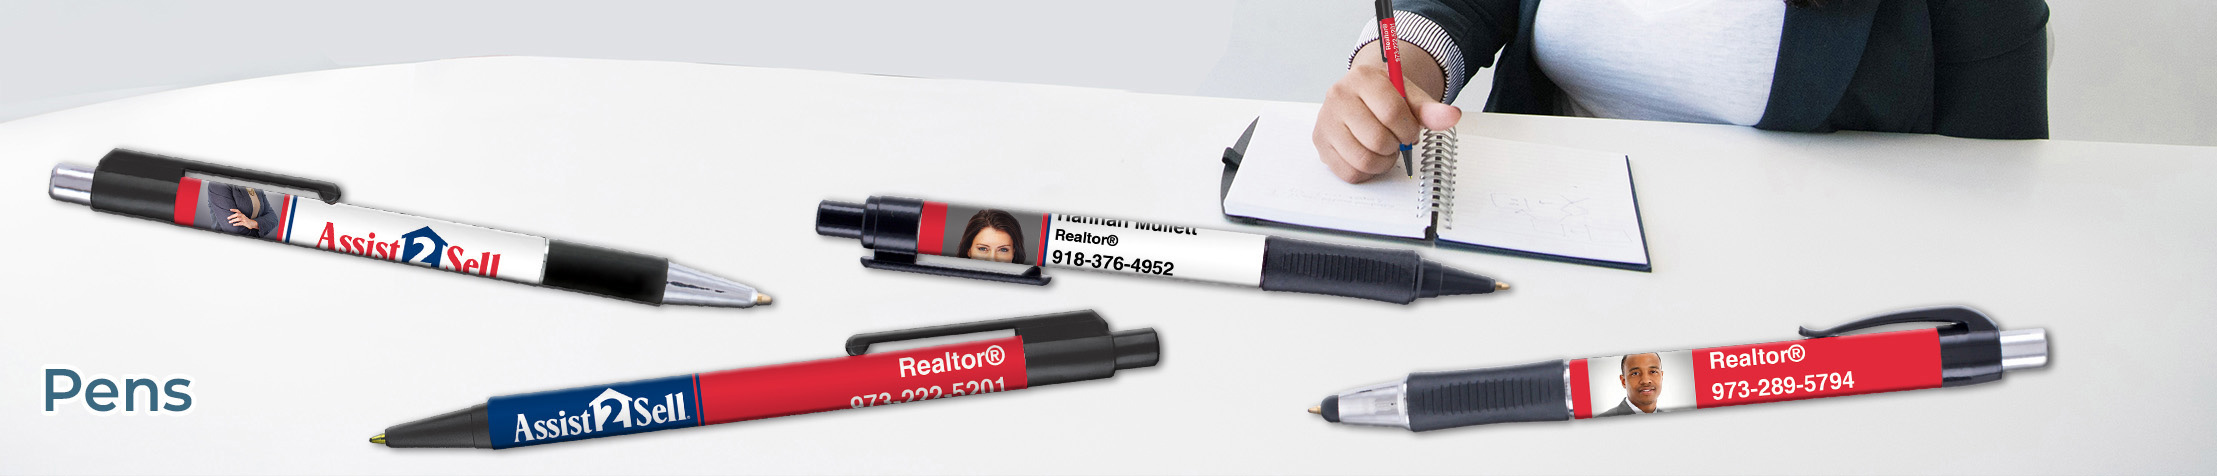 Assit2Sell Real Estate Pens - Assit2Sell Real Estate  personalized realtor promotional products | BestPrintBuy.com